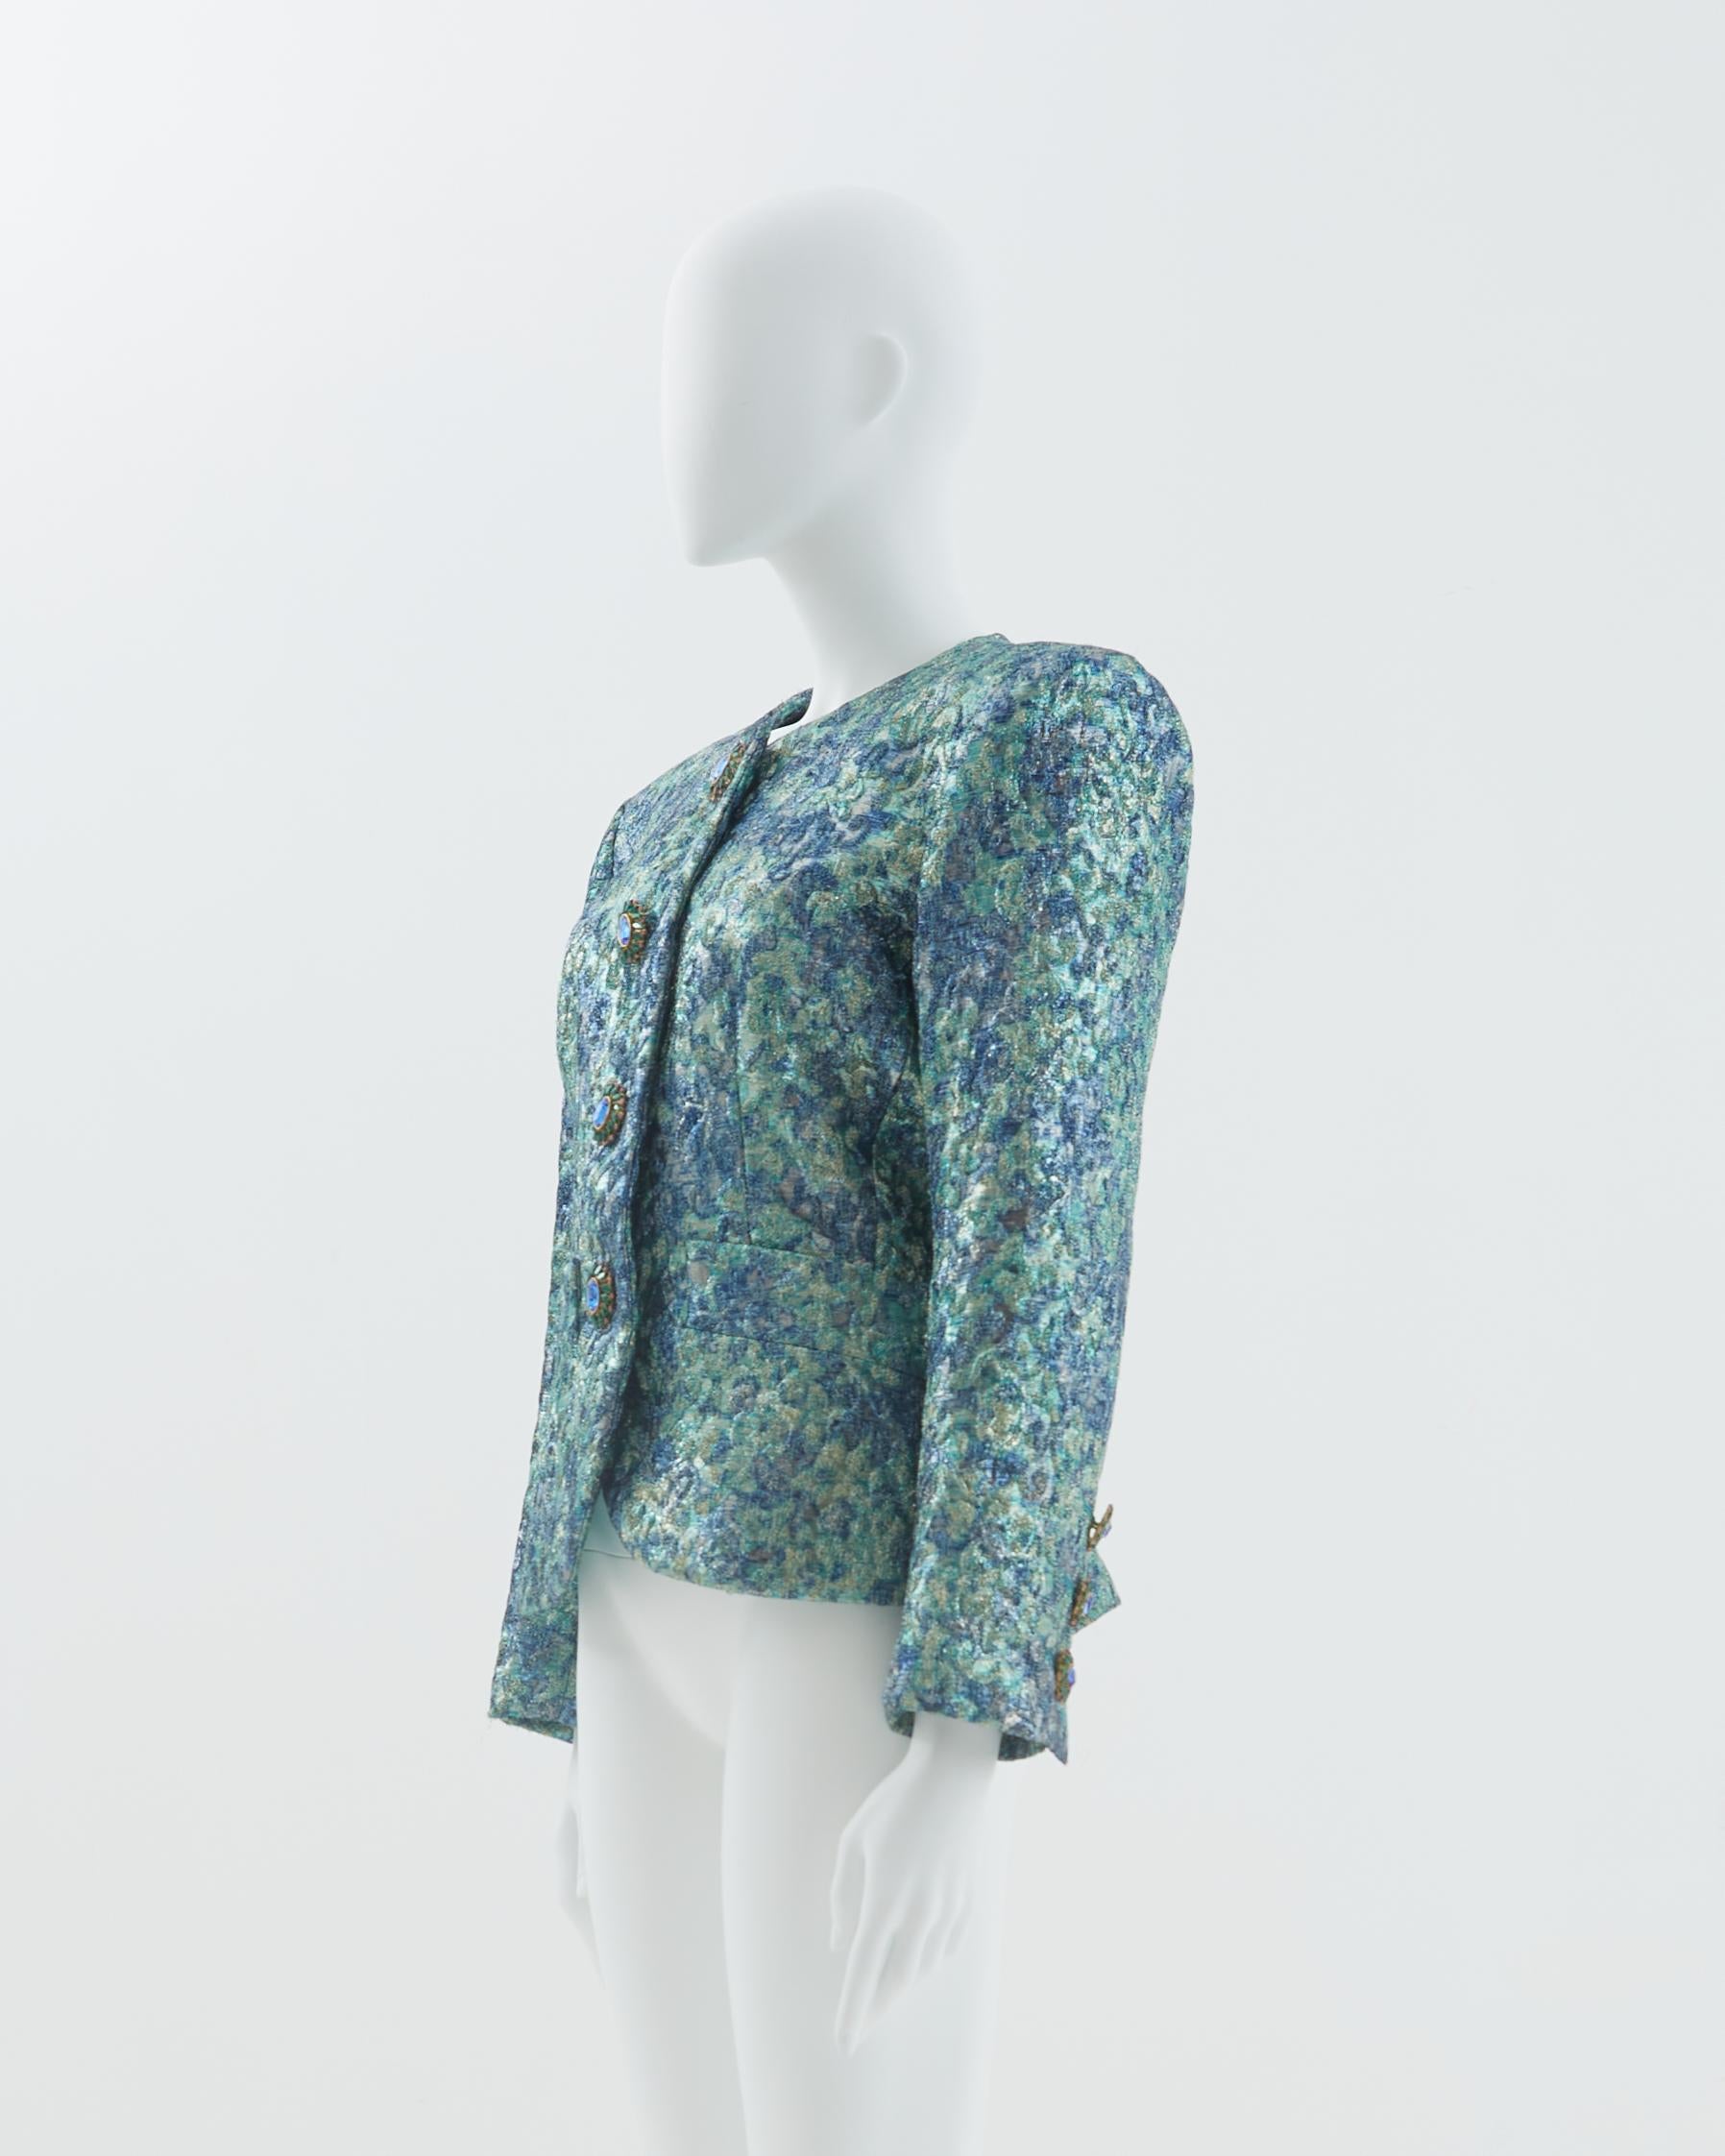 - Yves Saint Laurent Rive Gauche 
- Sold by Skof.Archive
- Blue silk and lurex brocade evening jacket
- Jewel buttons closure 
- Silk satin lining
- Fitted to the body 
- Fall Winter 1991

Size
FR 38 - EN 42 - UK 10 - US 8 (EU)

Measurements
Width